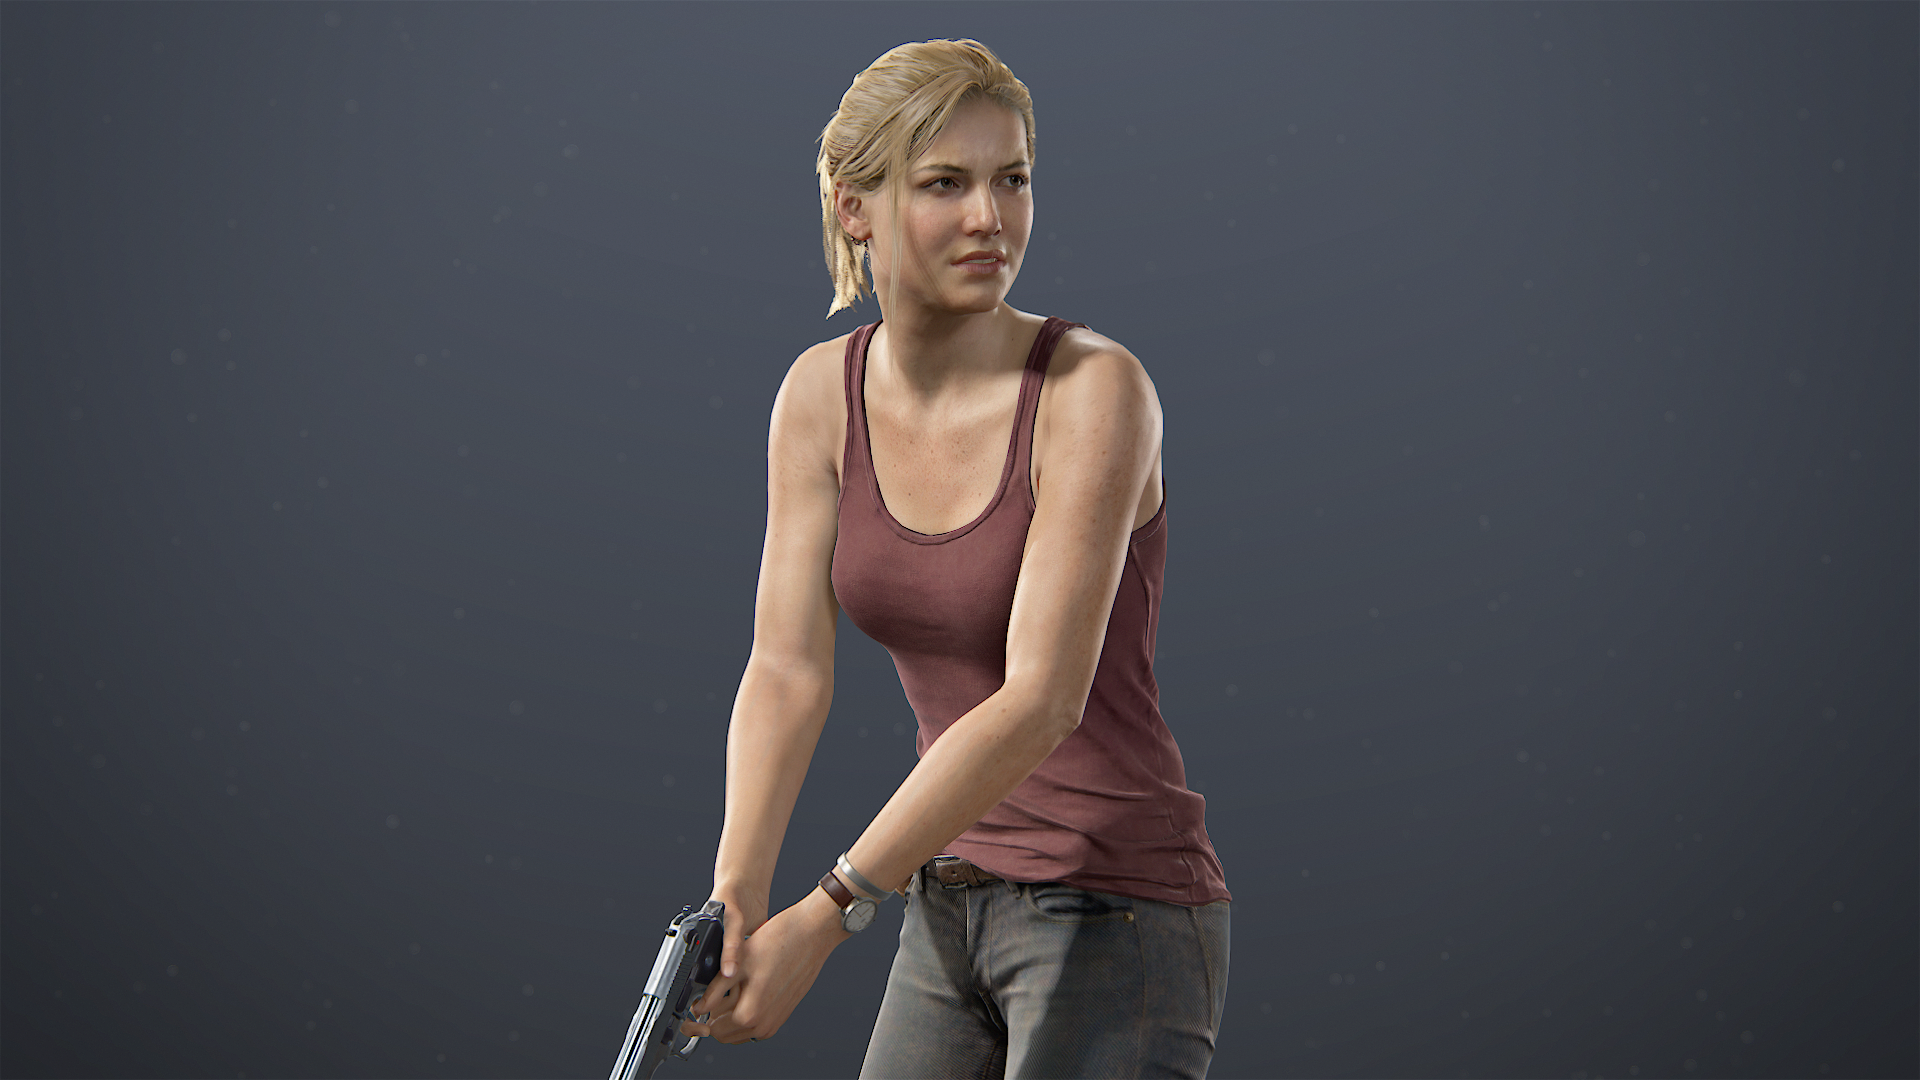 General 1920x1080 Uncharted 4: A Thief's End simple background video games 2016 (year) video game characters video game girls Elena fisher girls with guns women blonde wristwatch